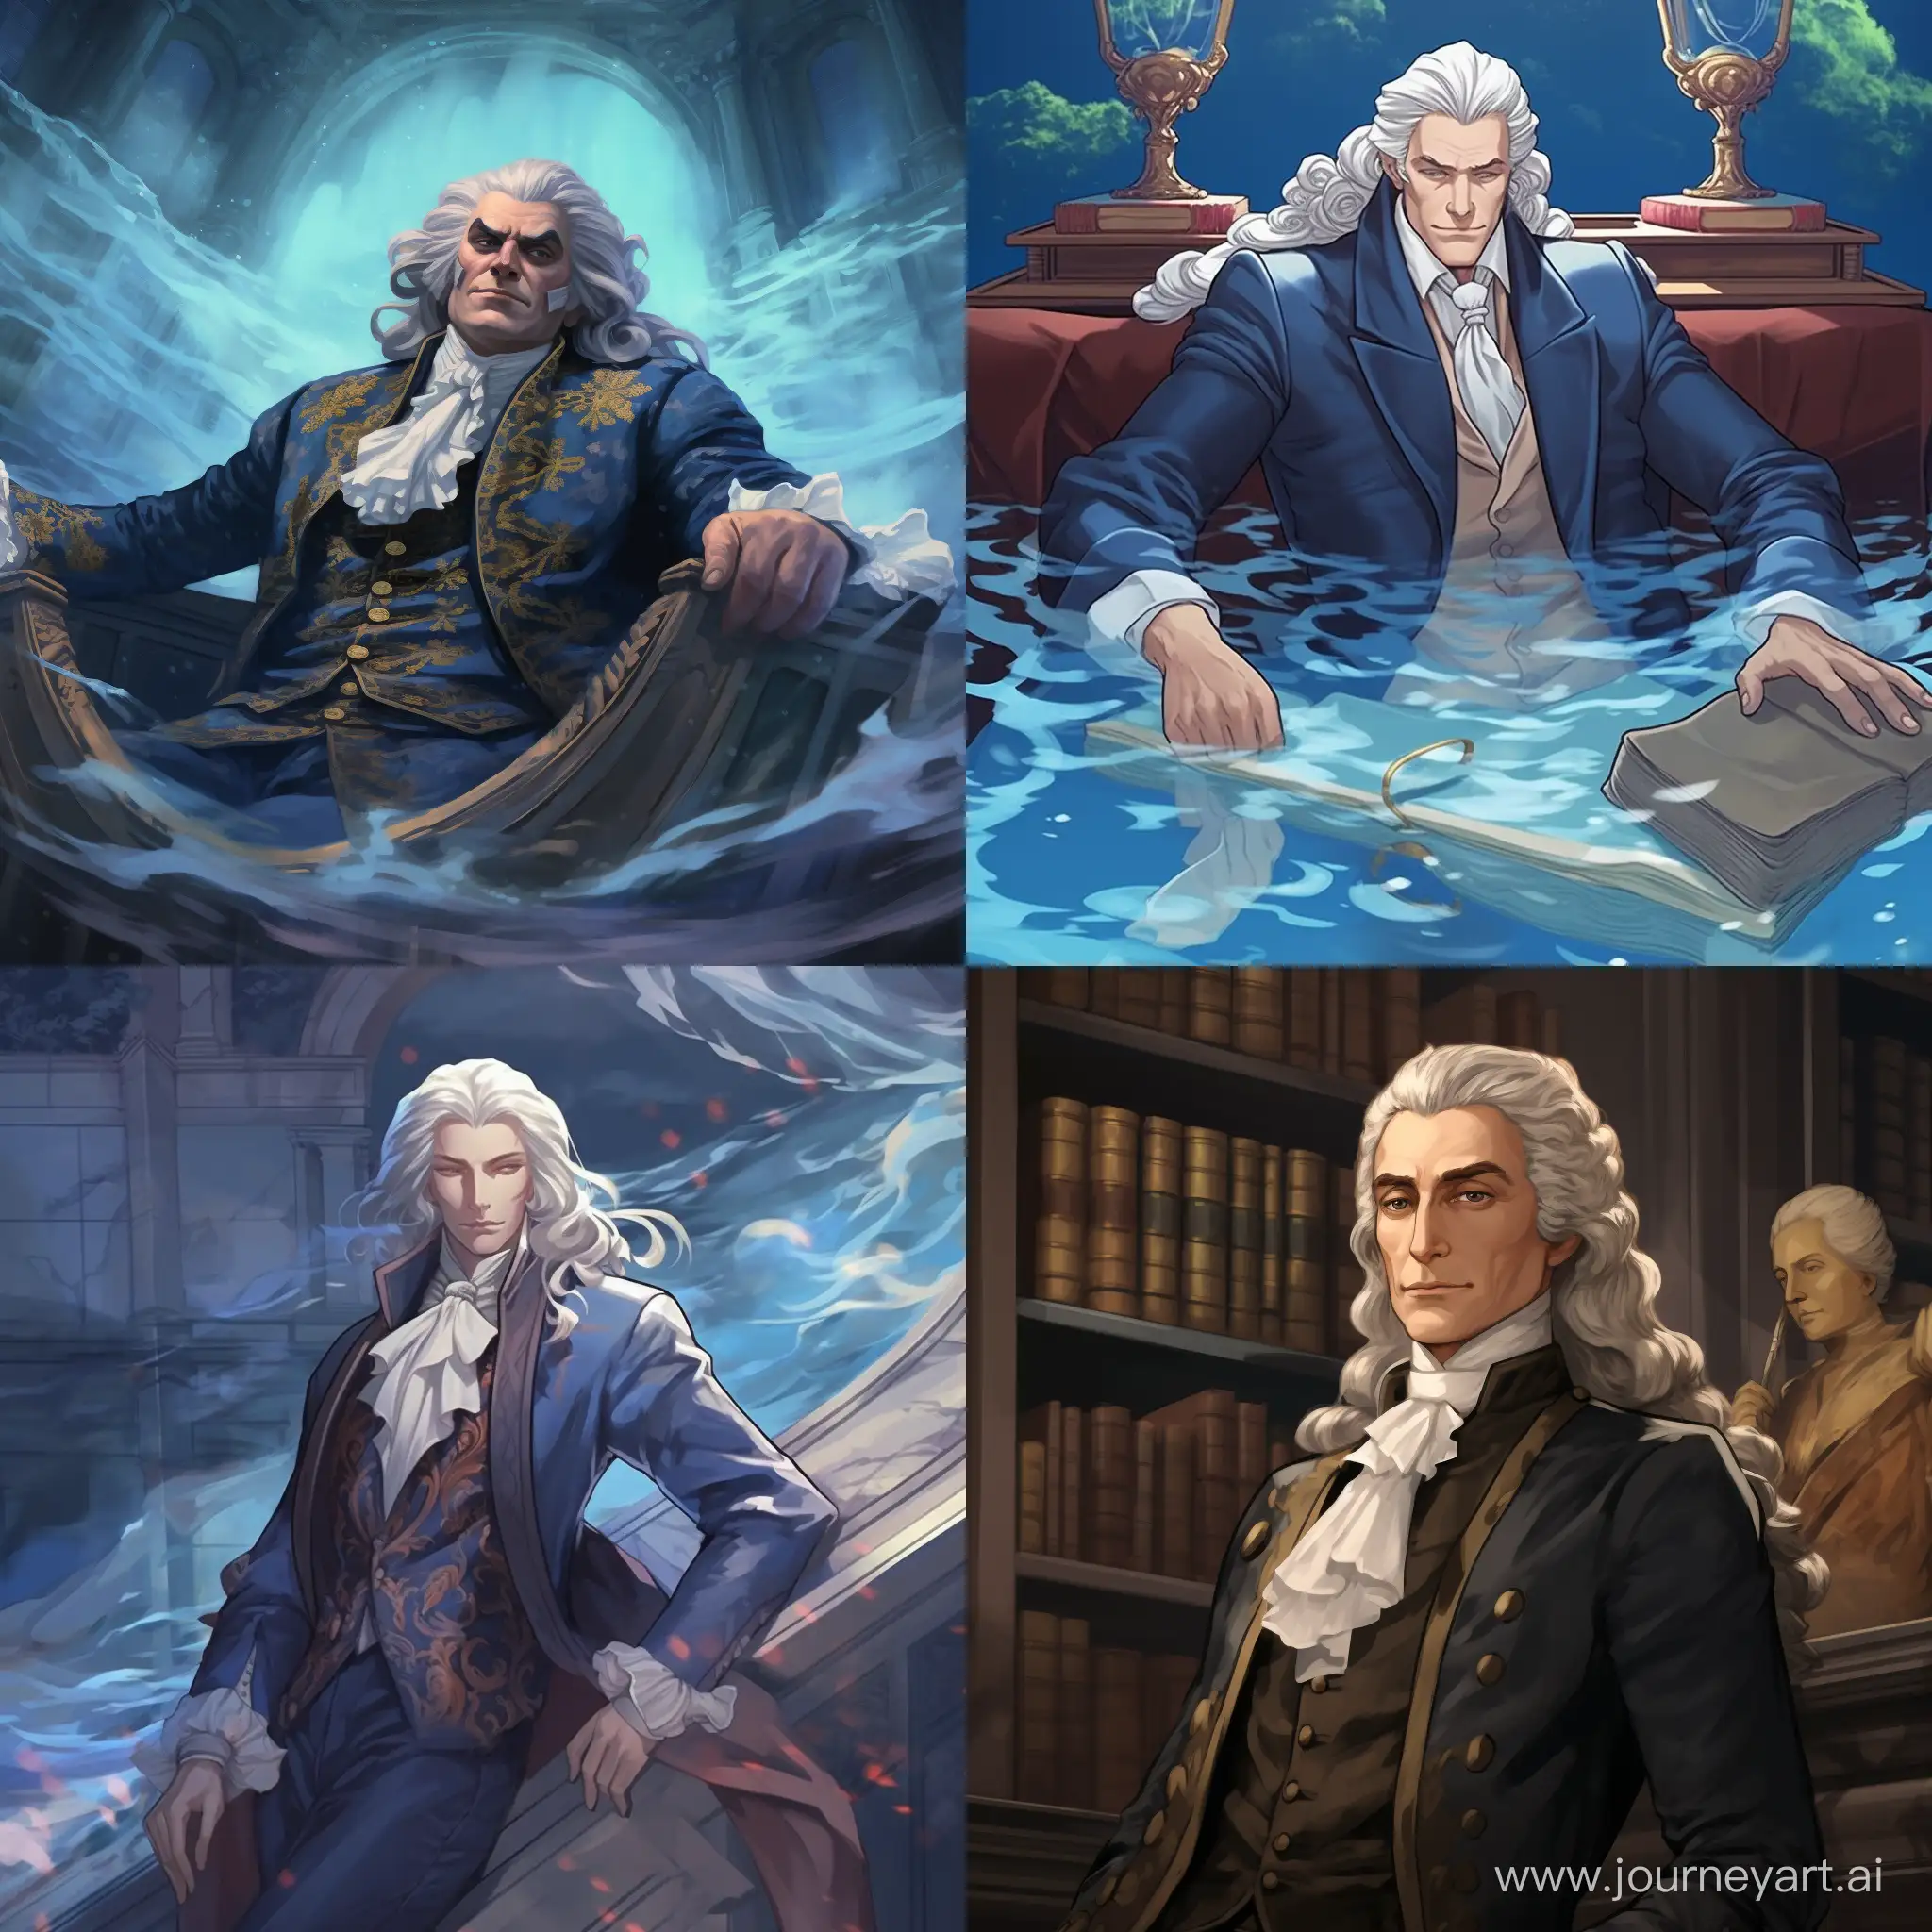 Supreme-Judge-Monsieur-Neville-Anime-Art-Depicting-the-Lord-of-Water-in-18th-Century-Fontaine